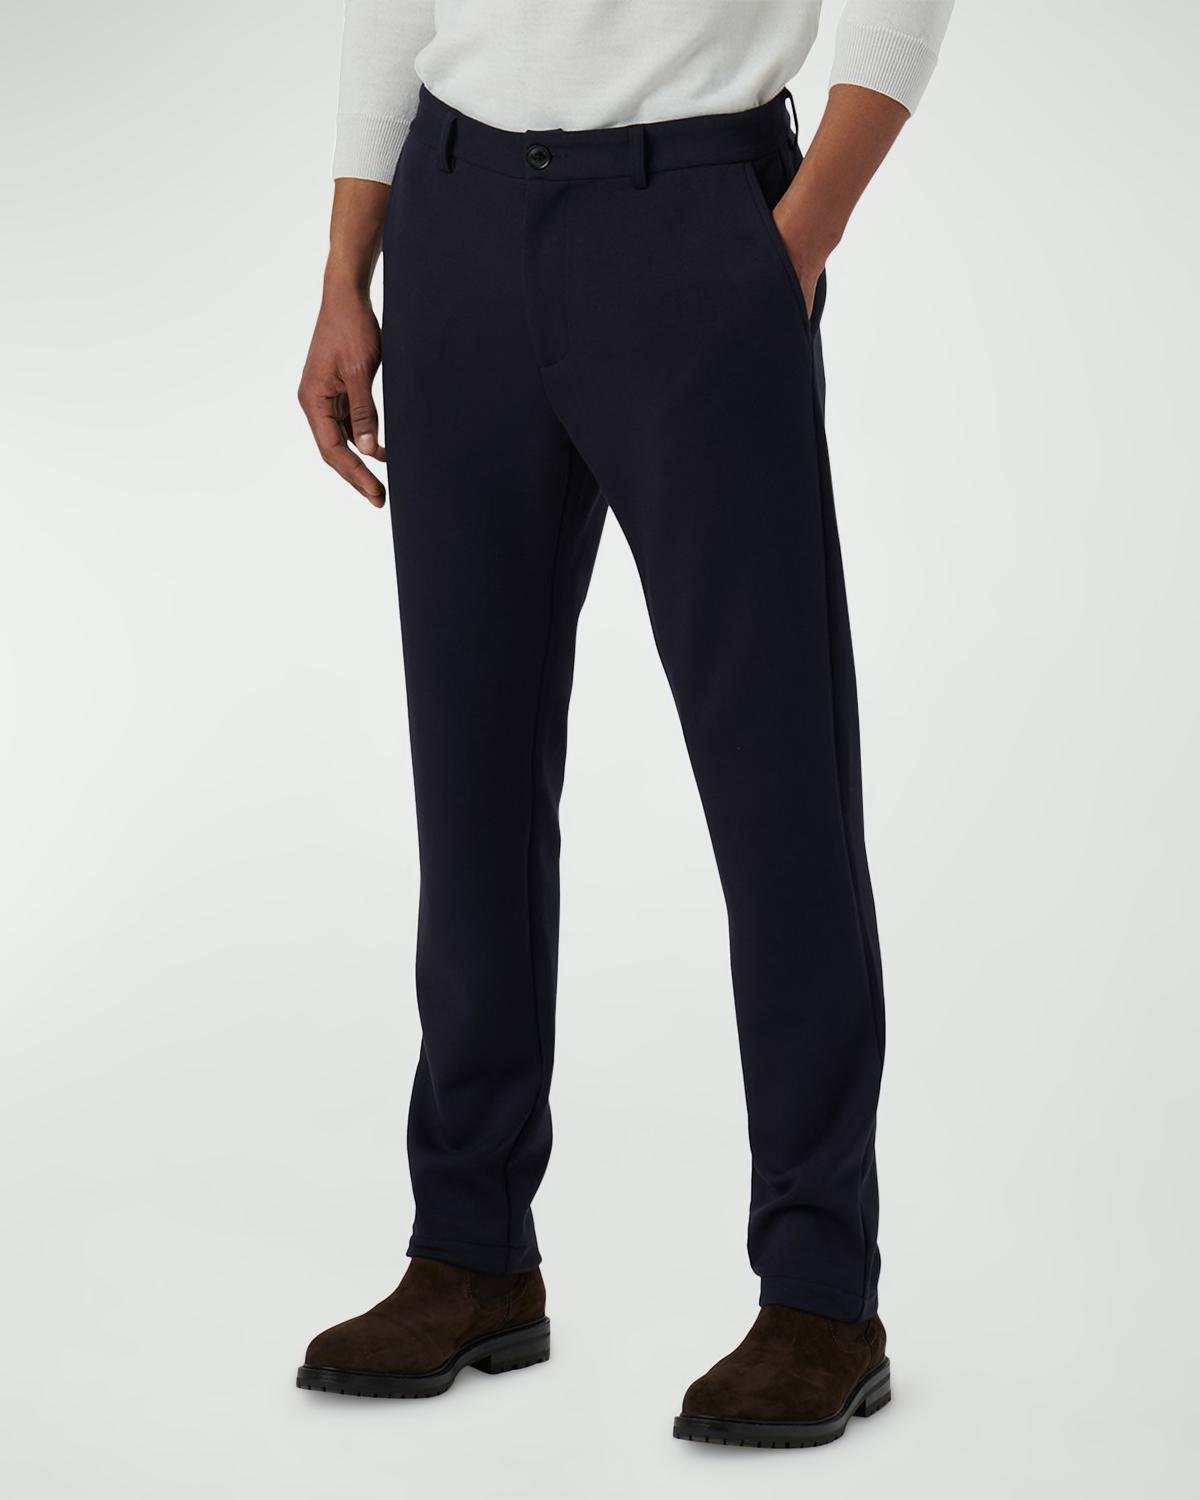 Men's Straight-Fit Soft Touch Dress Pants by BUGATCHI